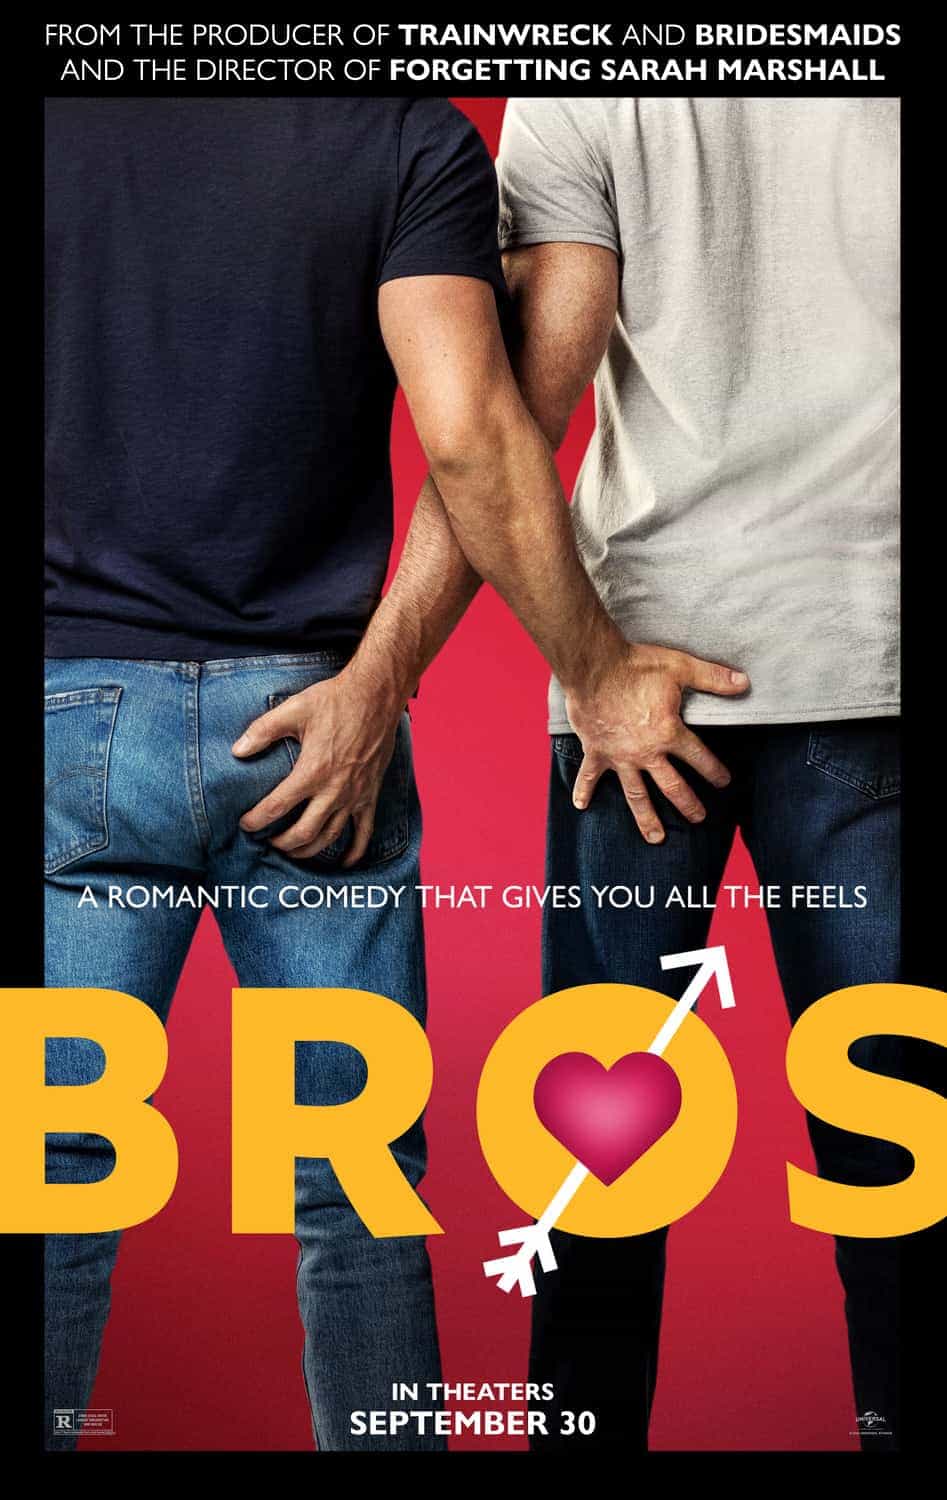 BROS is given a 15 age rating in the UK for strong sex, sex references, language, drug misuse